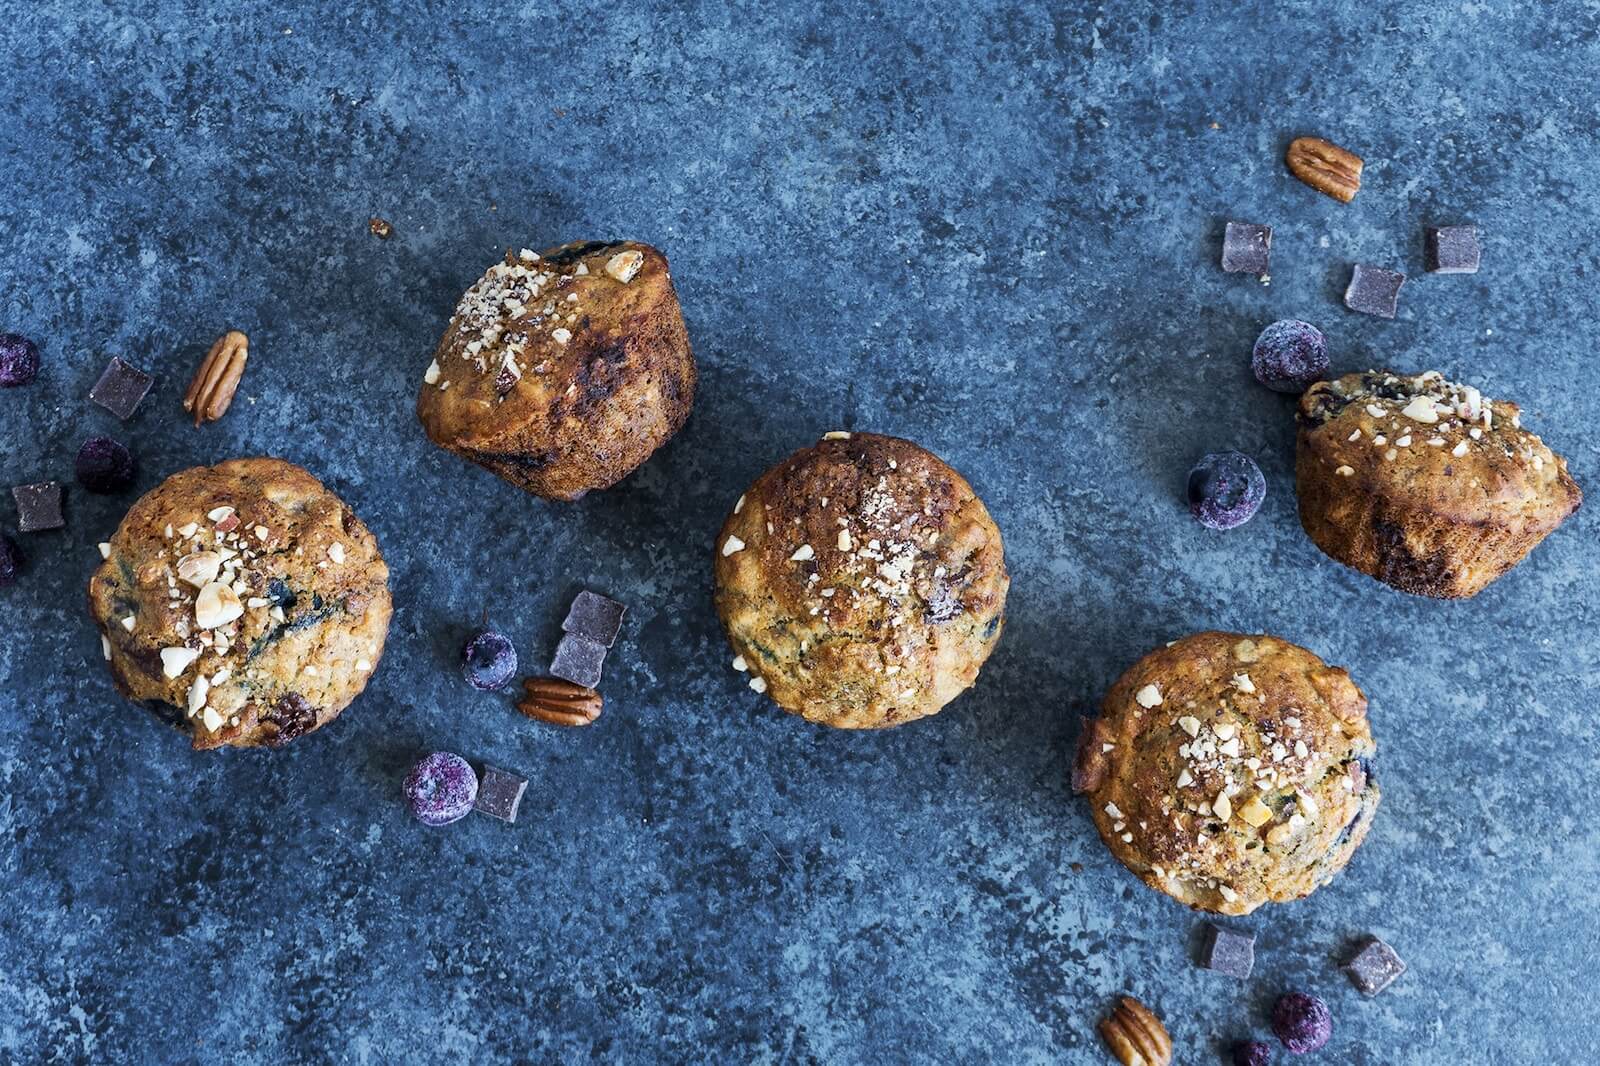 Image of Gluten-Free Banana Muffins with Blueberries, Pecans and Chocolate Chunks